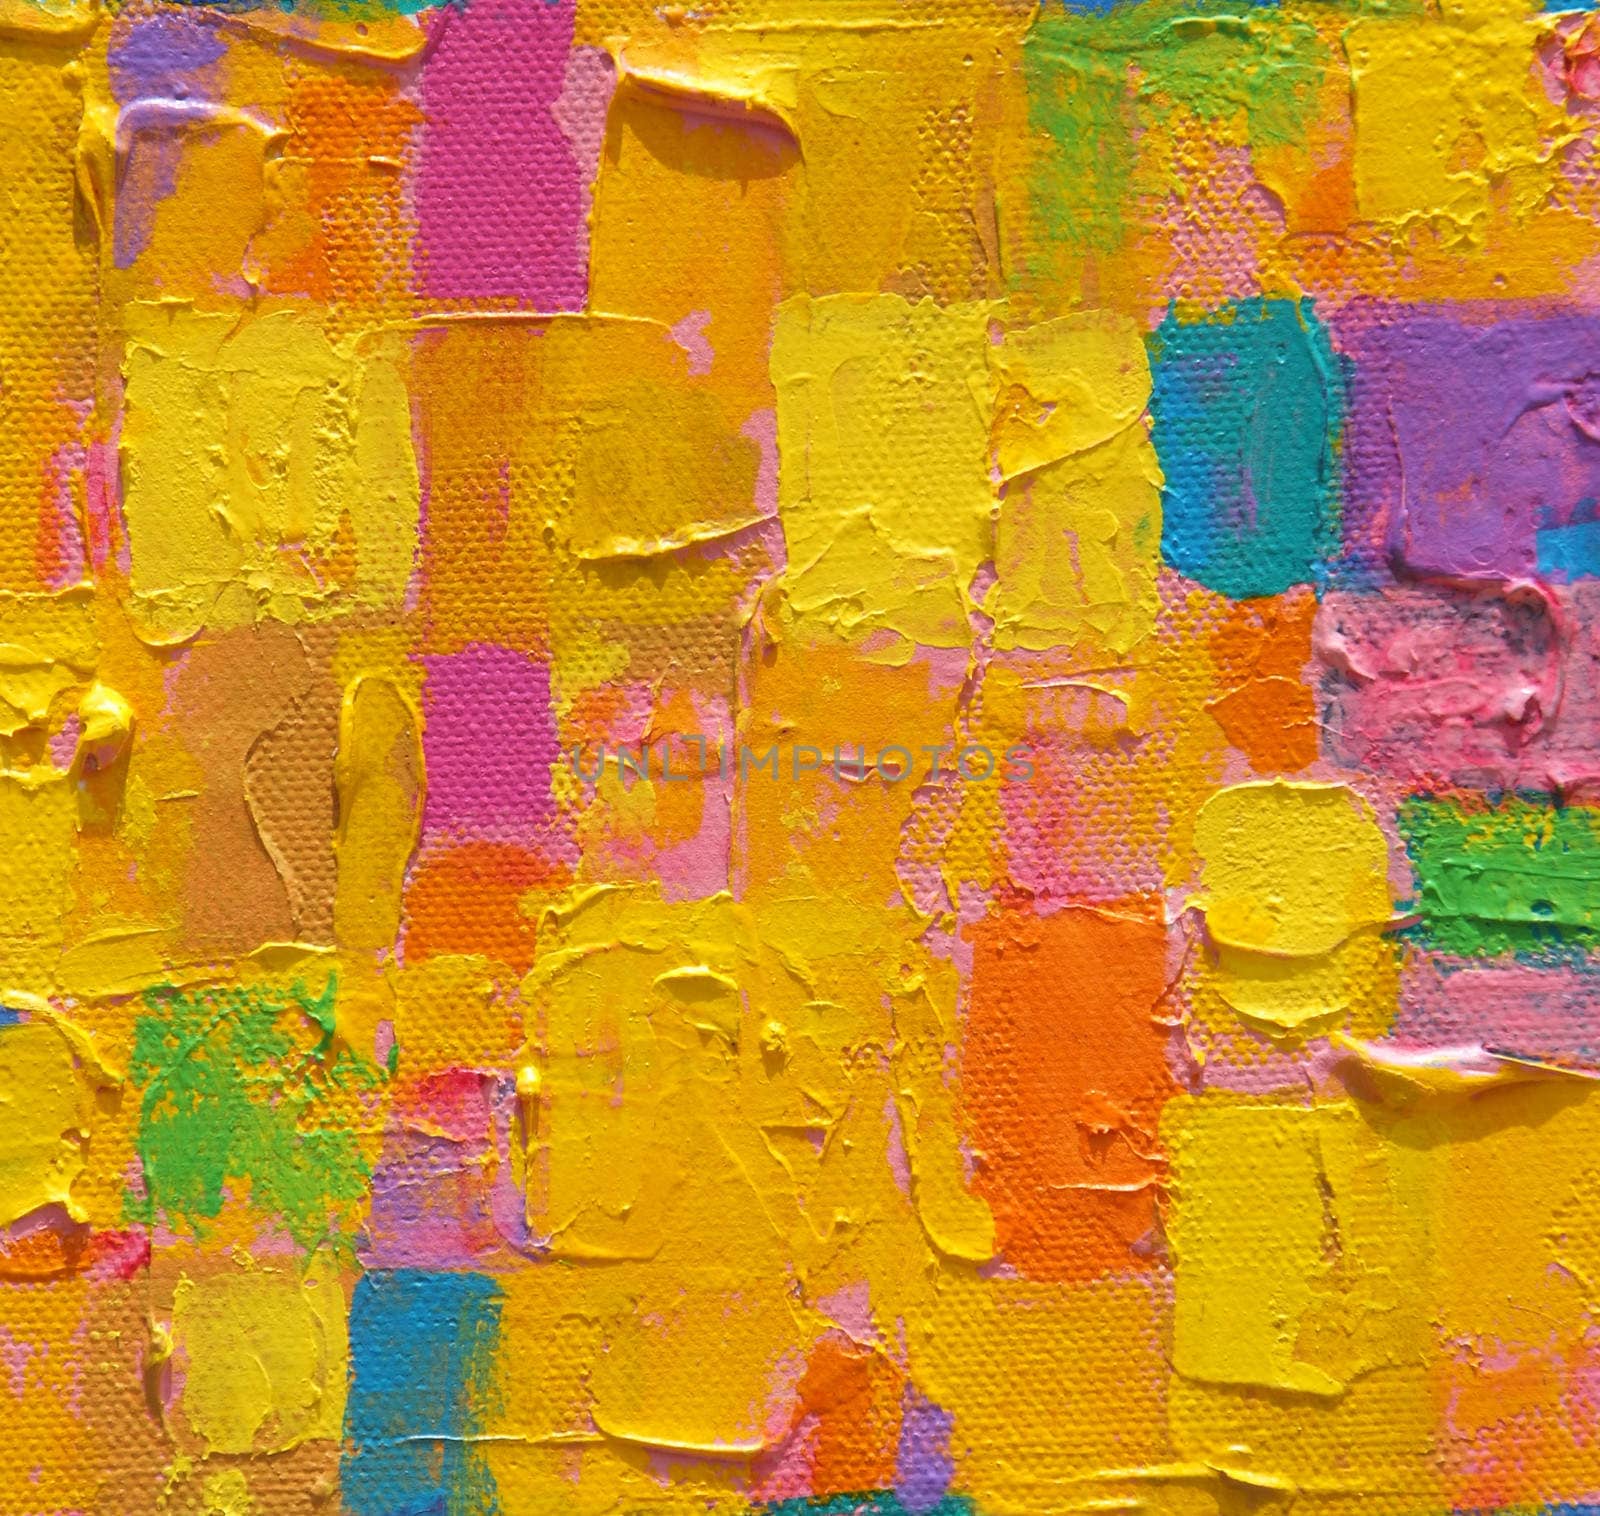 "Yellow painting" Texture, background and Colorful Image of an original Abstract Painting on Canvas 